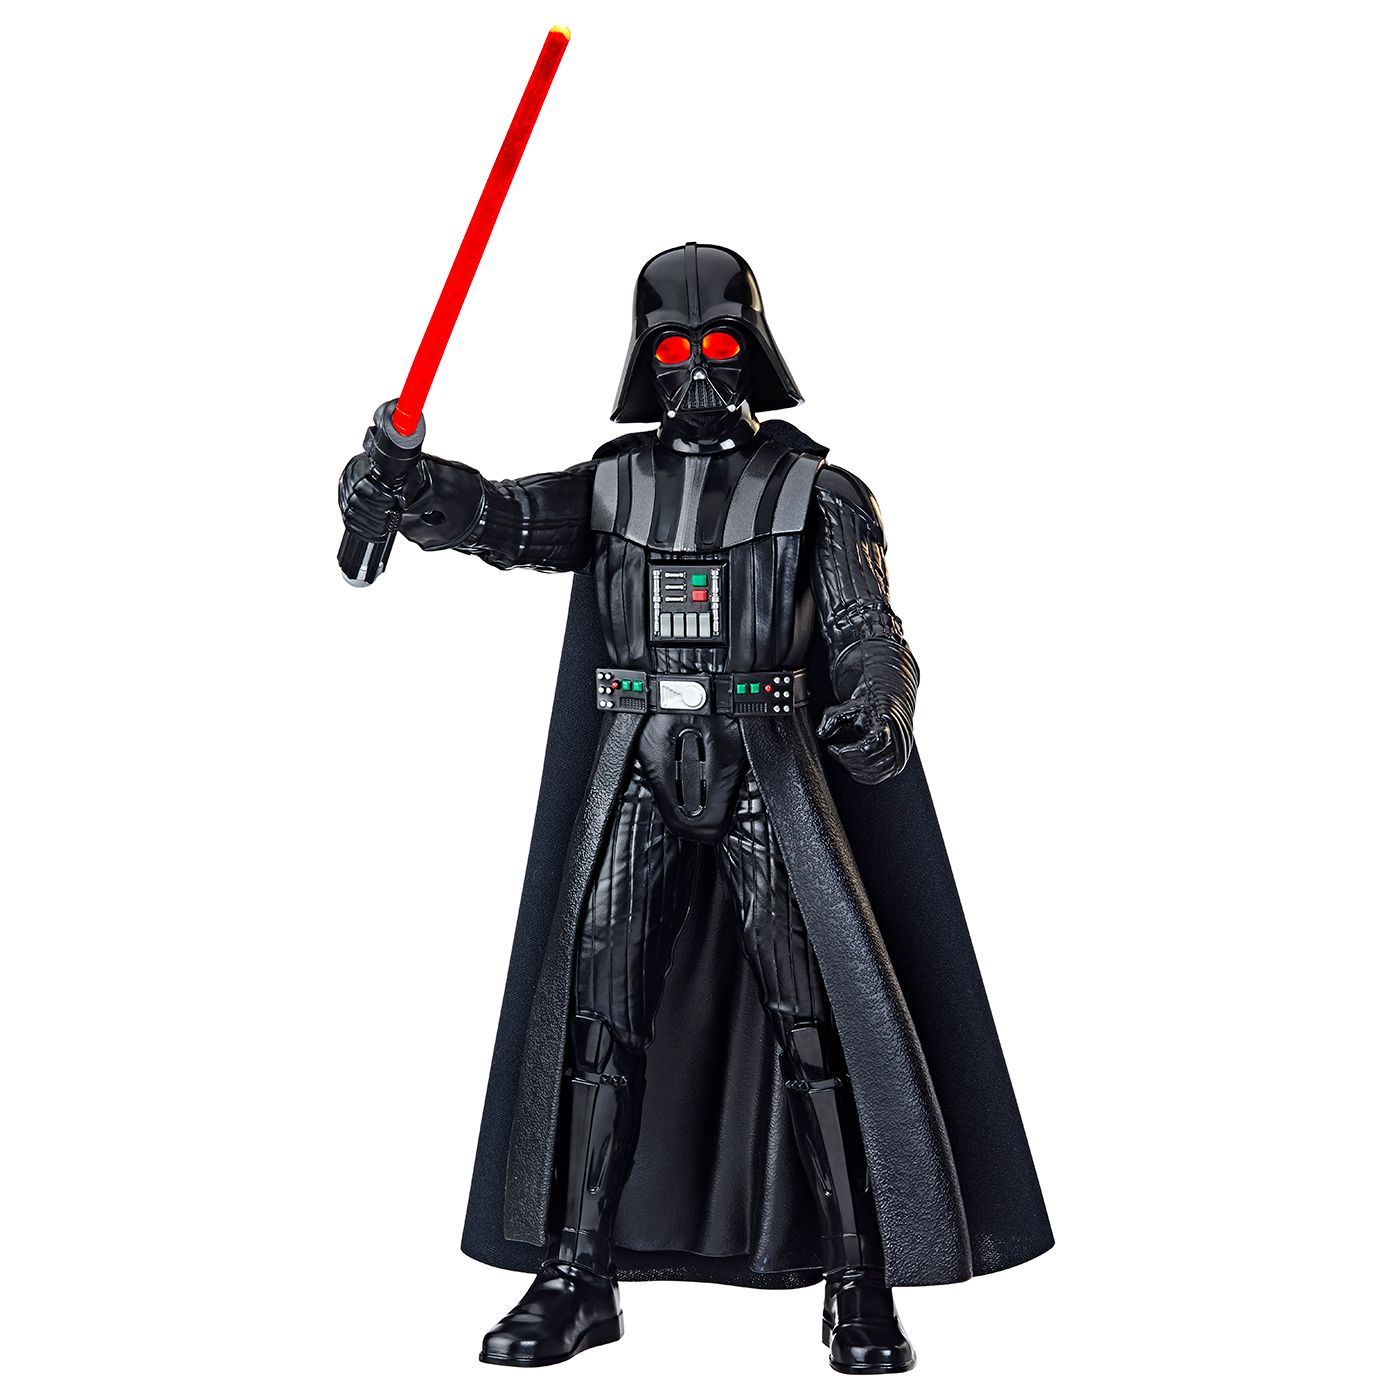 STAR WARS GALACTIC ACTION DARTH VADER INTERACTIVE ELECTRONIC FIGURE 2 copy